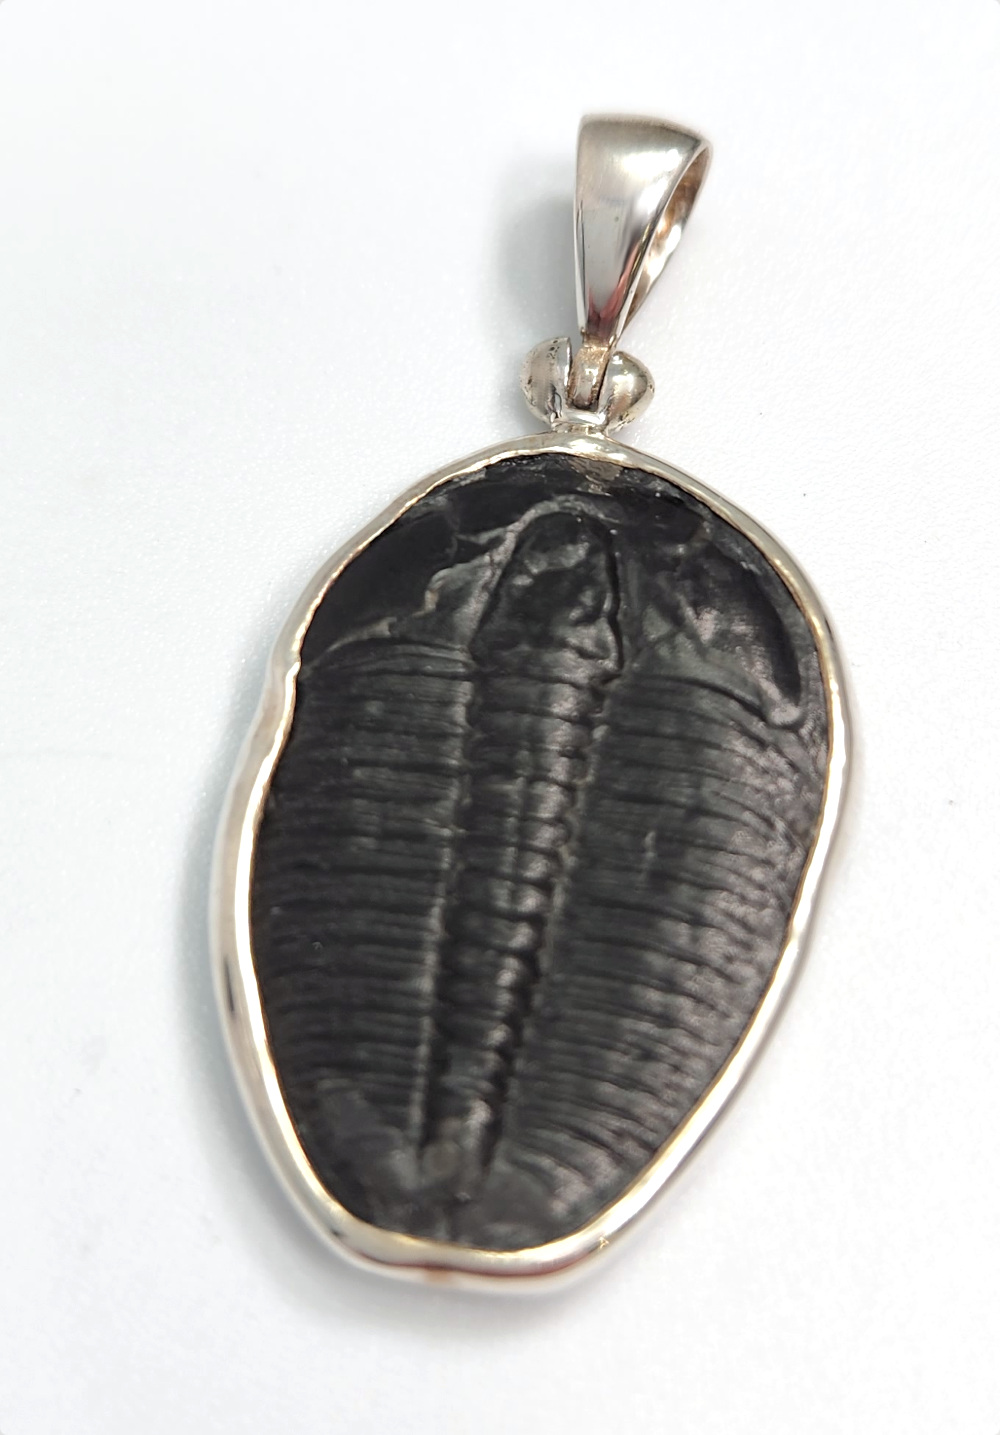 trilobite fossil and sterling silver pendant by Starborn Creations